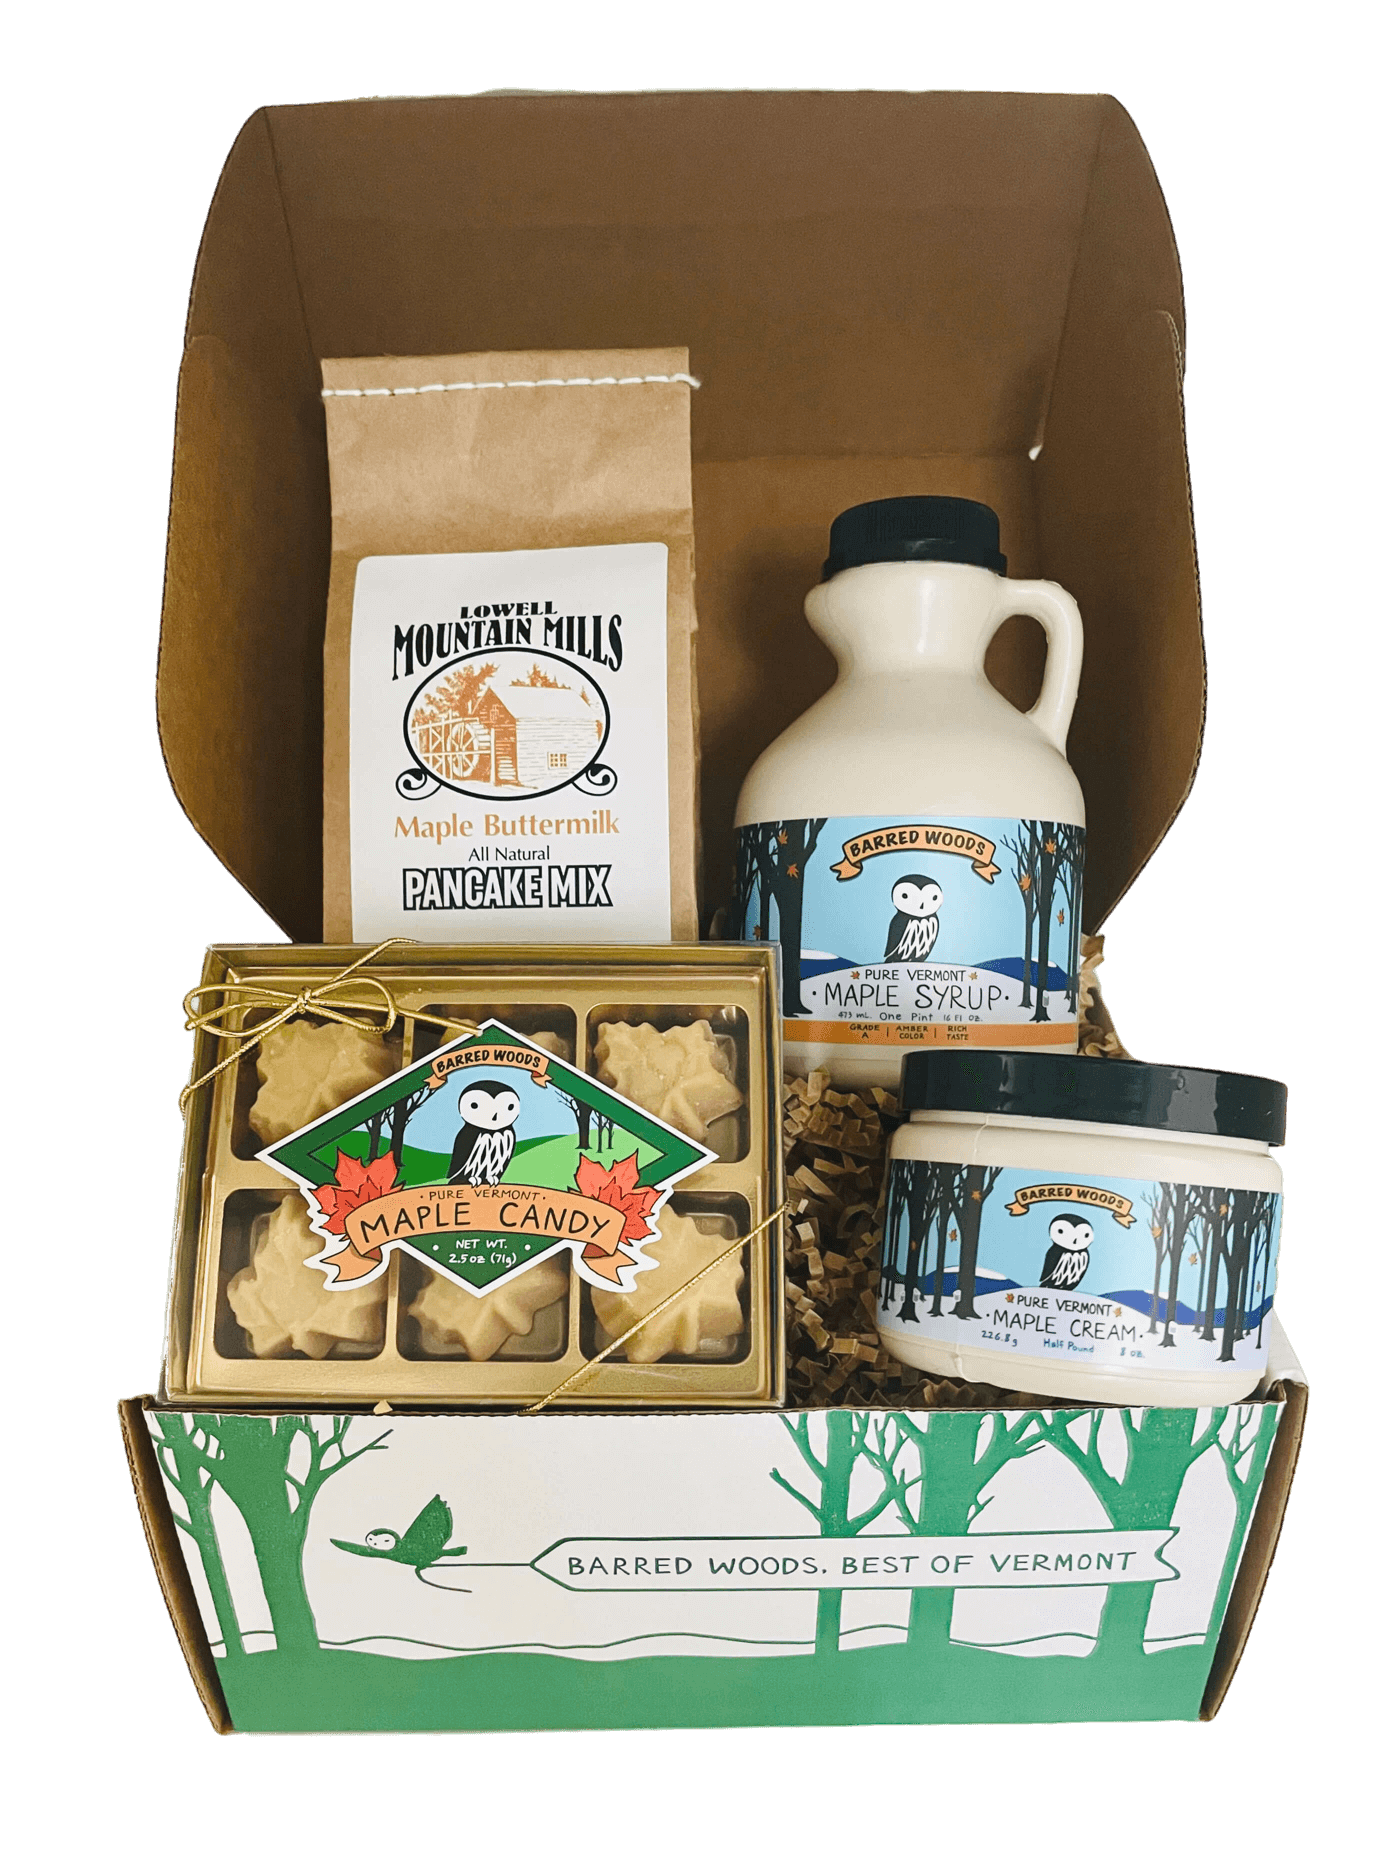 maple gift box with vermont maple syrup and pancakes. Can be ordered in bulk and sent to multiple addresses.  Perfect Corporate gift.